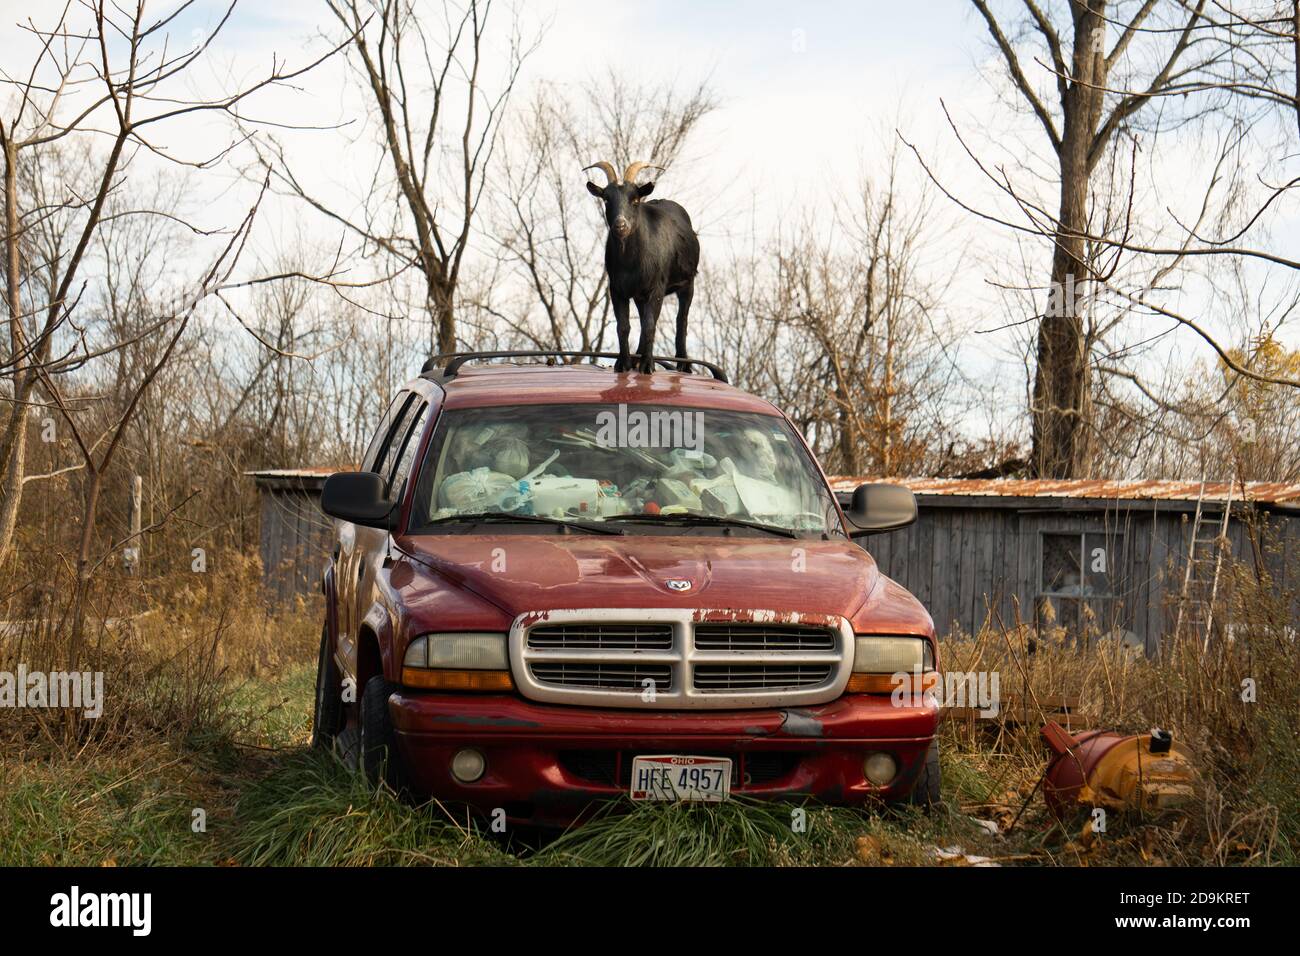 Goat Stands on Junked car ominously Stock Photo